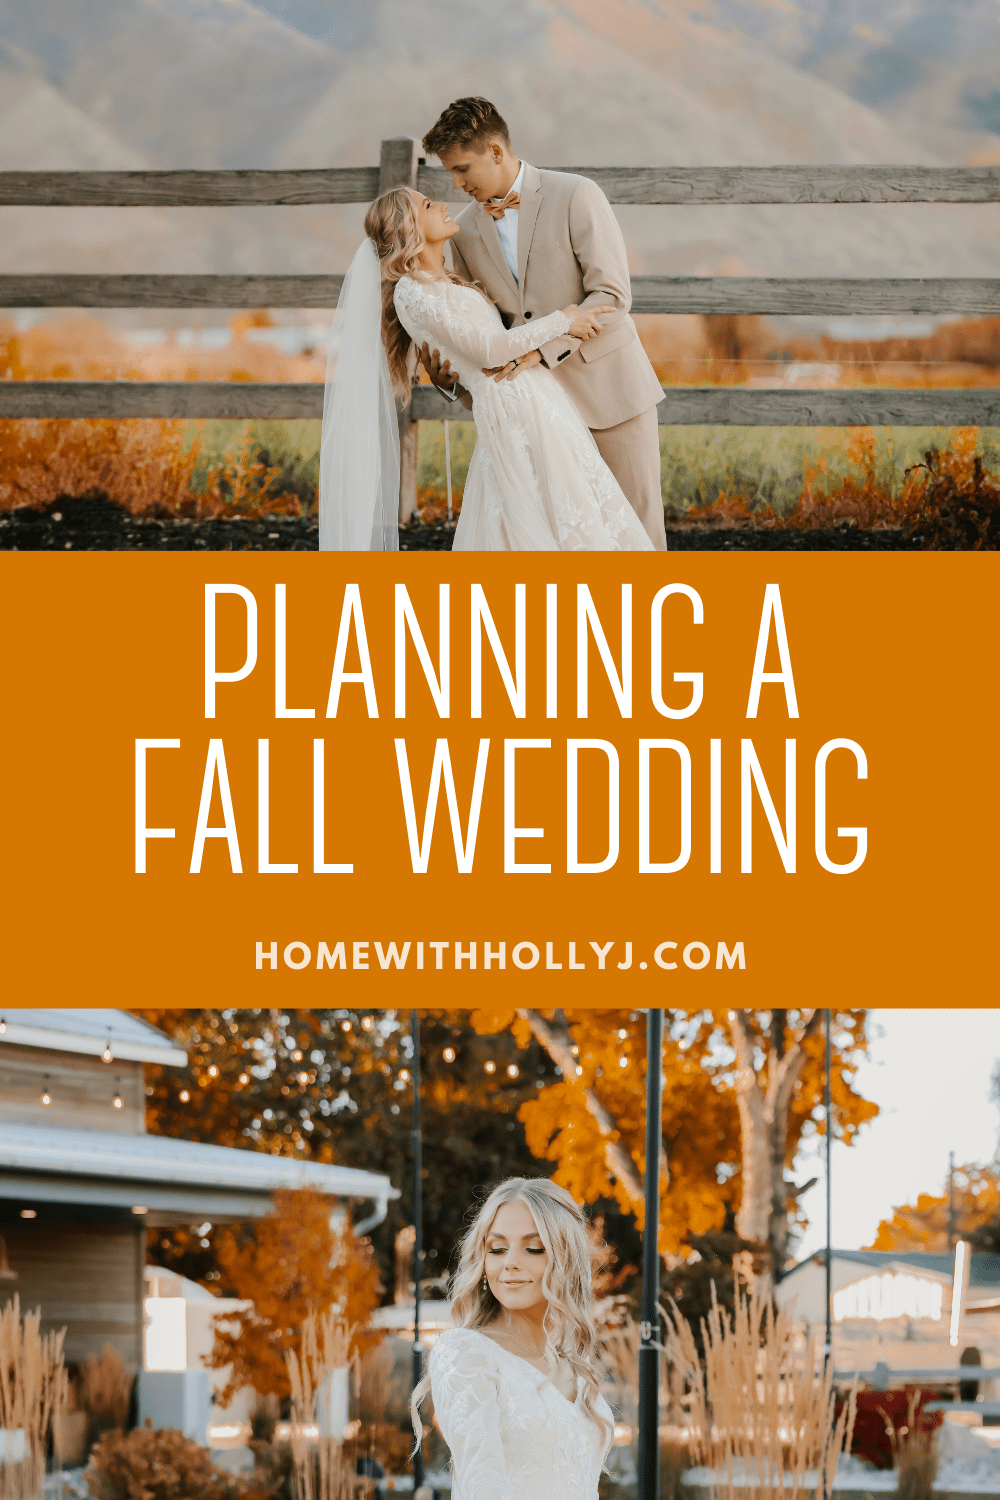 Expert tips and inspiration for planning a fall wedding. Embrace the beauty of autumn with our best planning tips for your dream celebration.